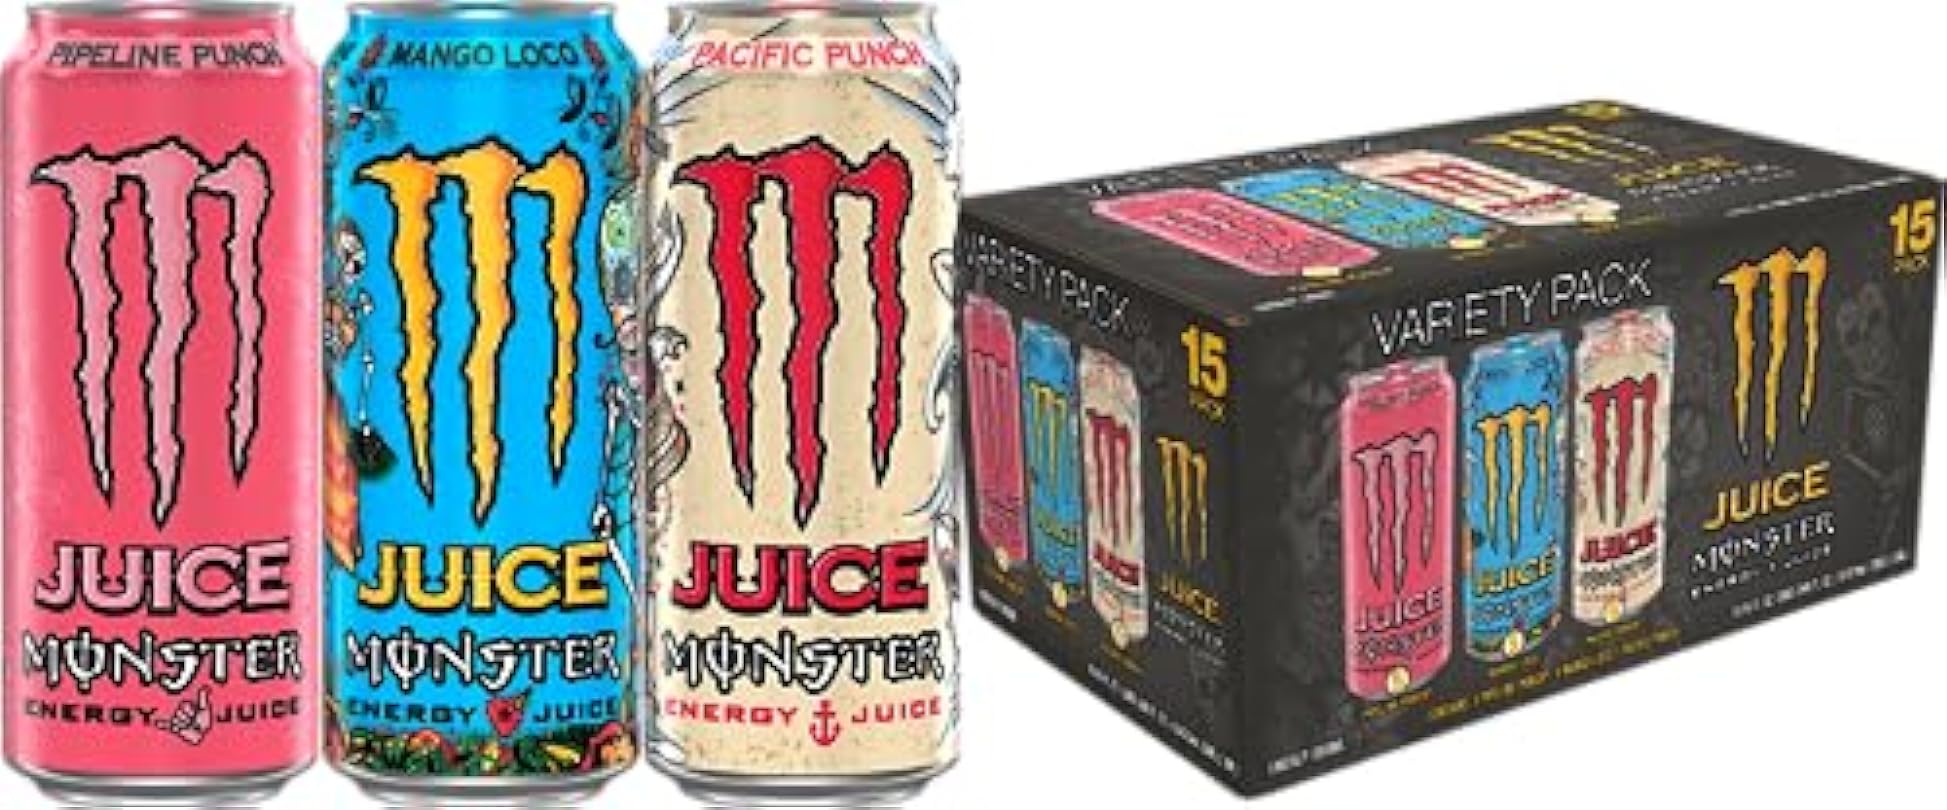 Monster Energy Juice Monster Variety Pack, Pipeline Punch, Mango Loco, Pacific Punch, Energy+Juice, Energy Drink, 16 Ounce (Pack of 15) 63419504